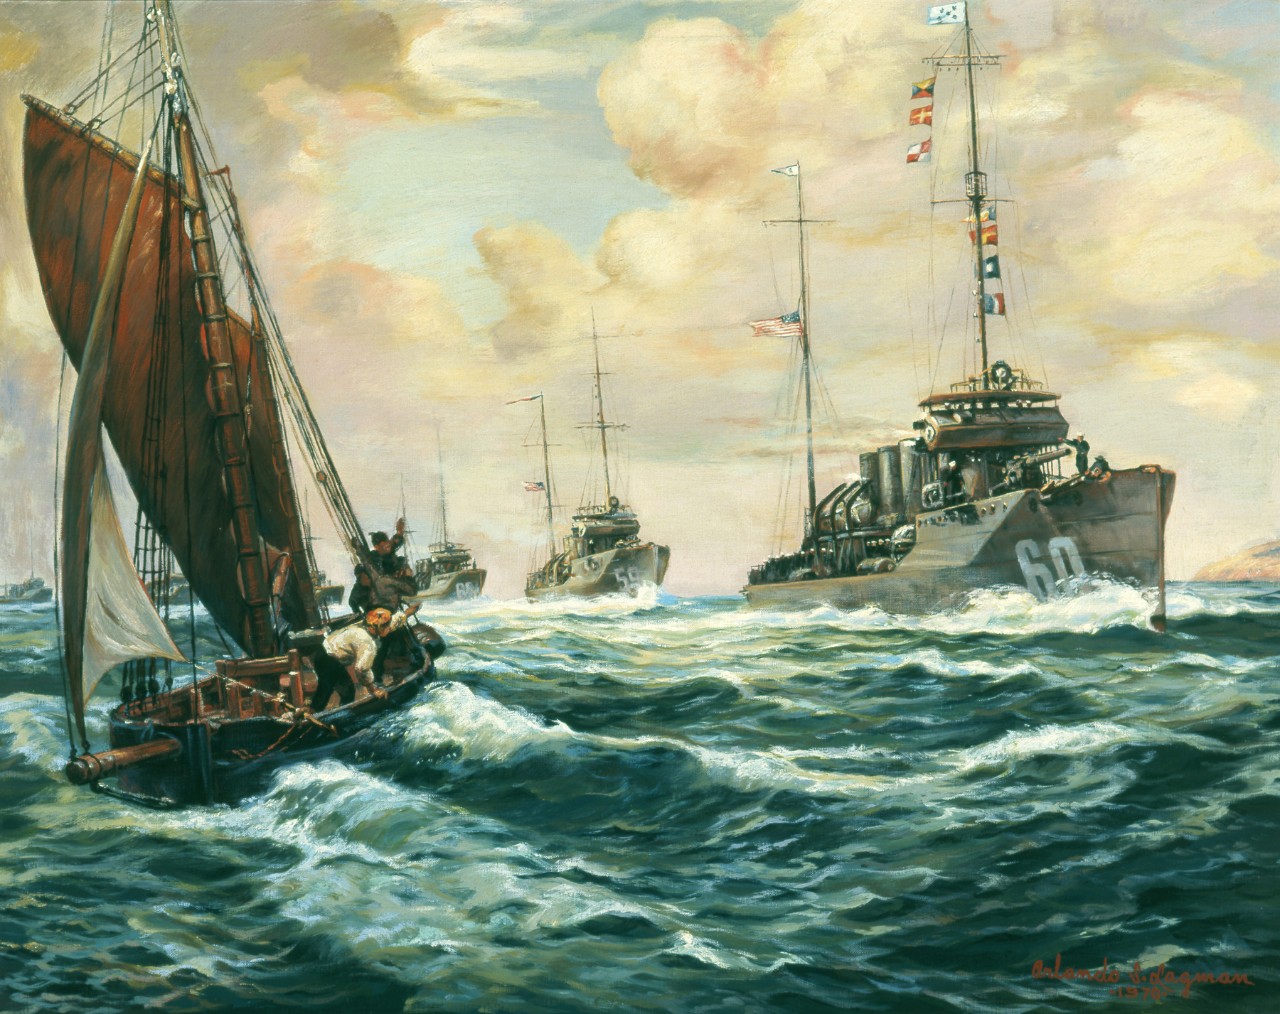 Oil painting by Bernard F. Gribble of the first U.S. destroyers to reach Europe